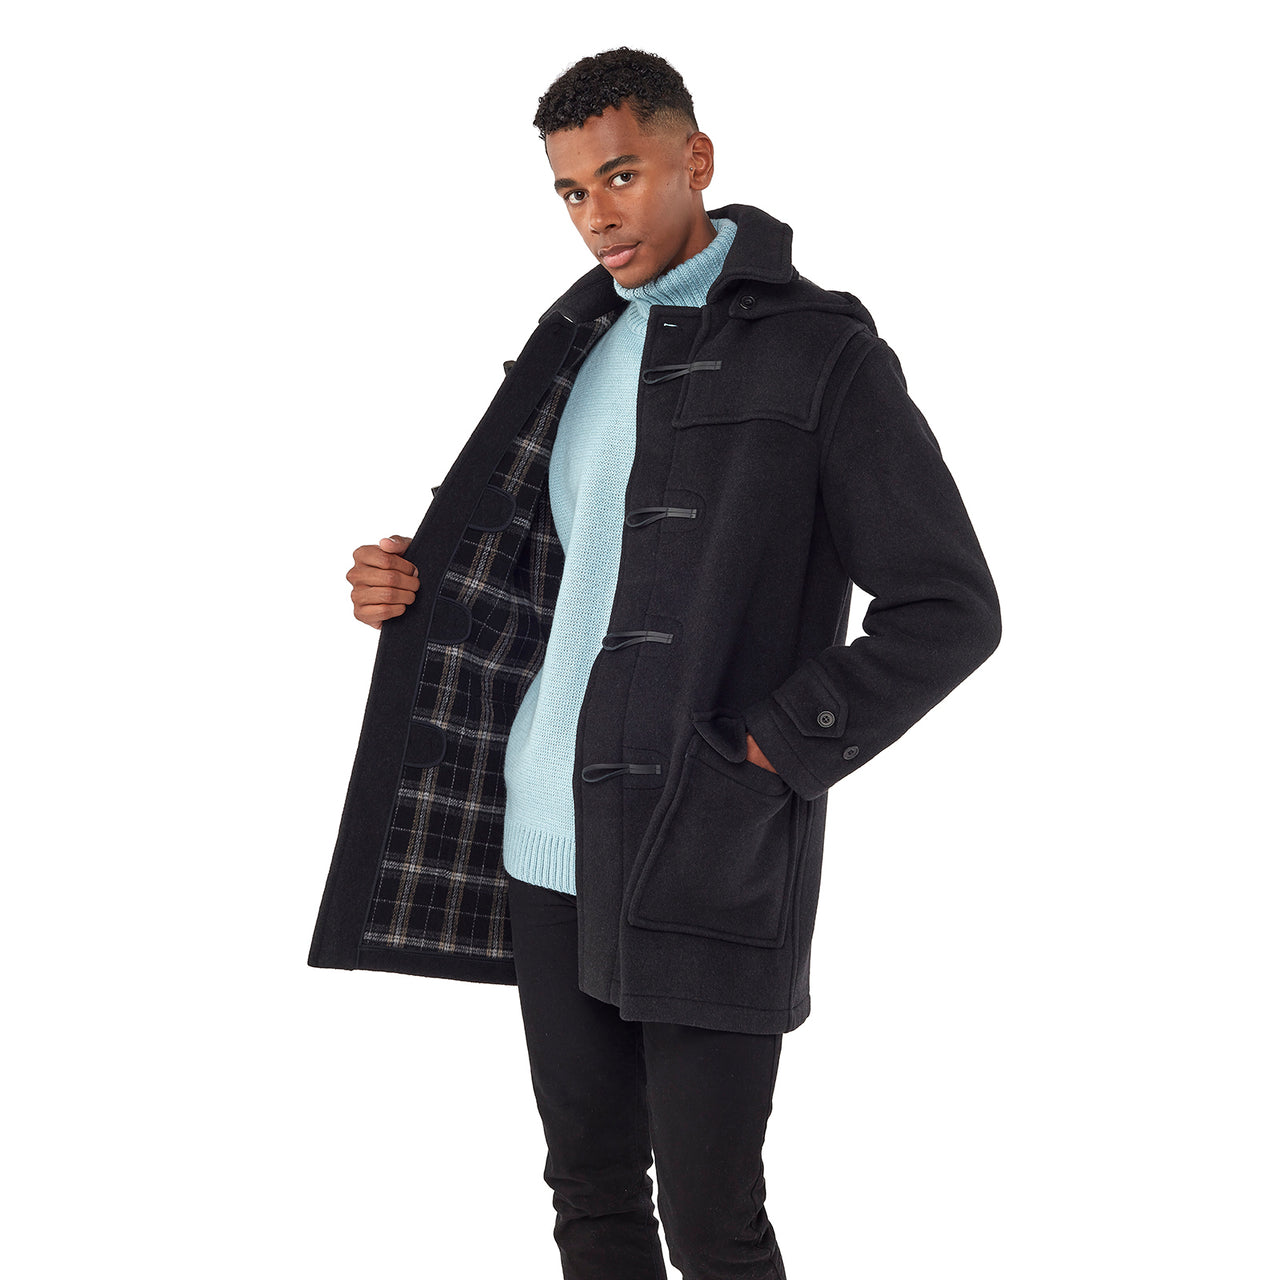 Men's Charcoal London Custom Fit Convertible Duffle Coat, With Original Removable Hood And Horn Toggles